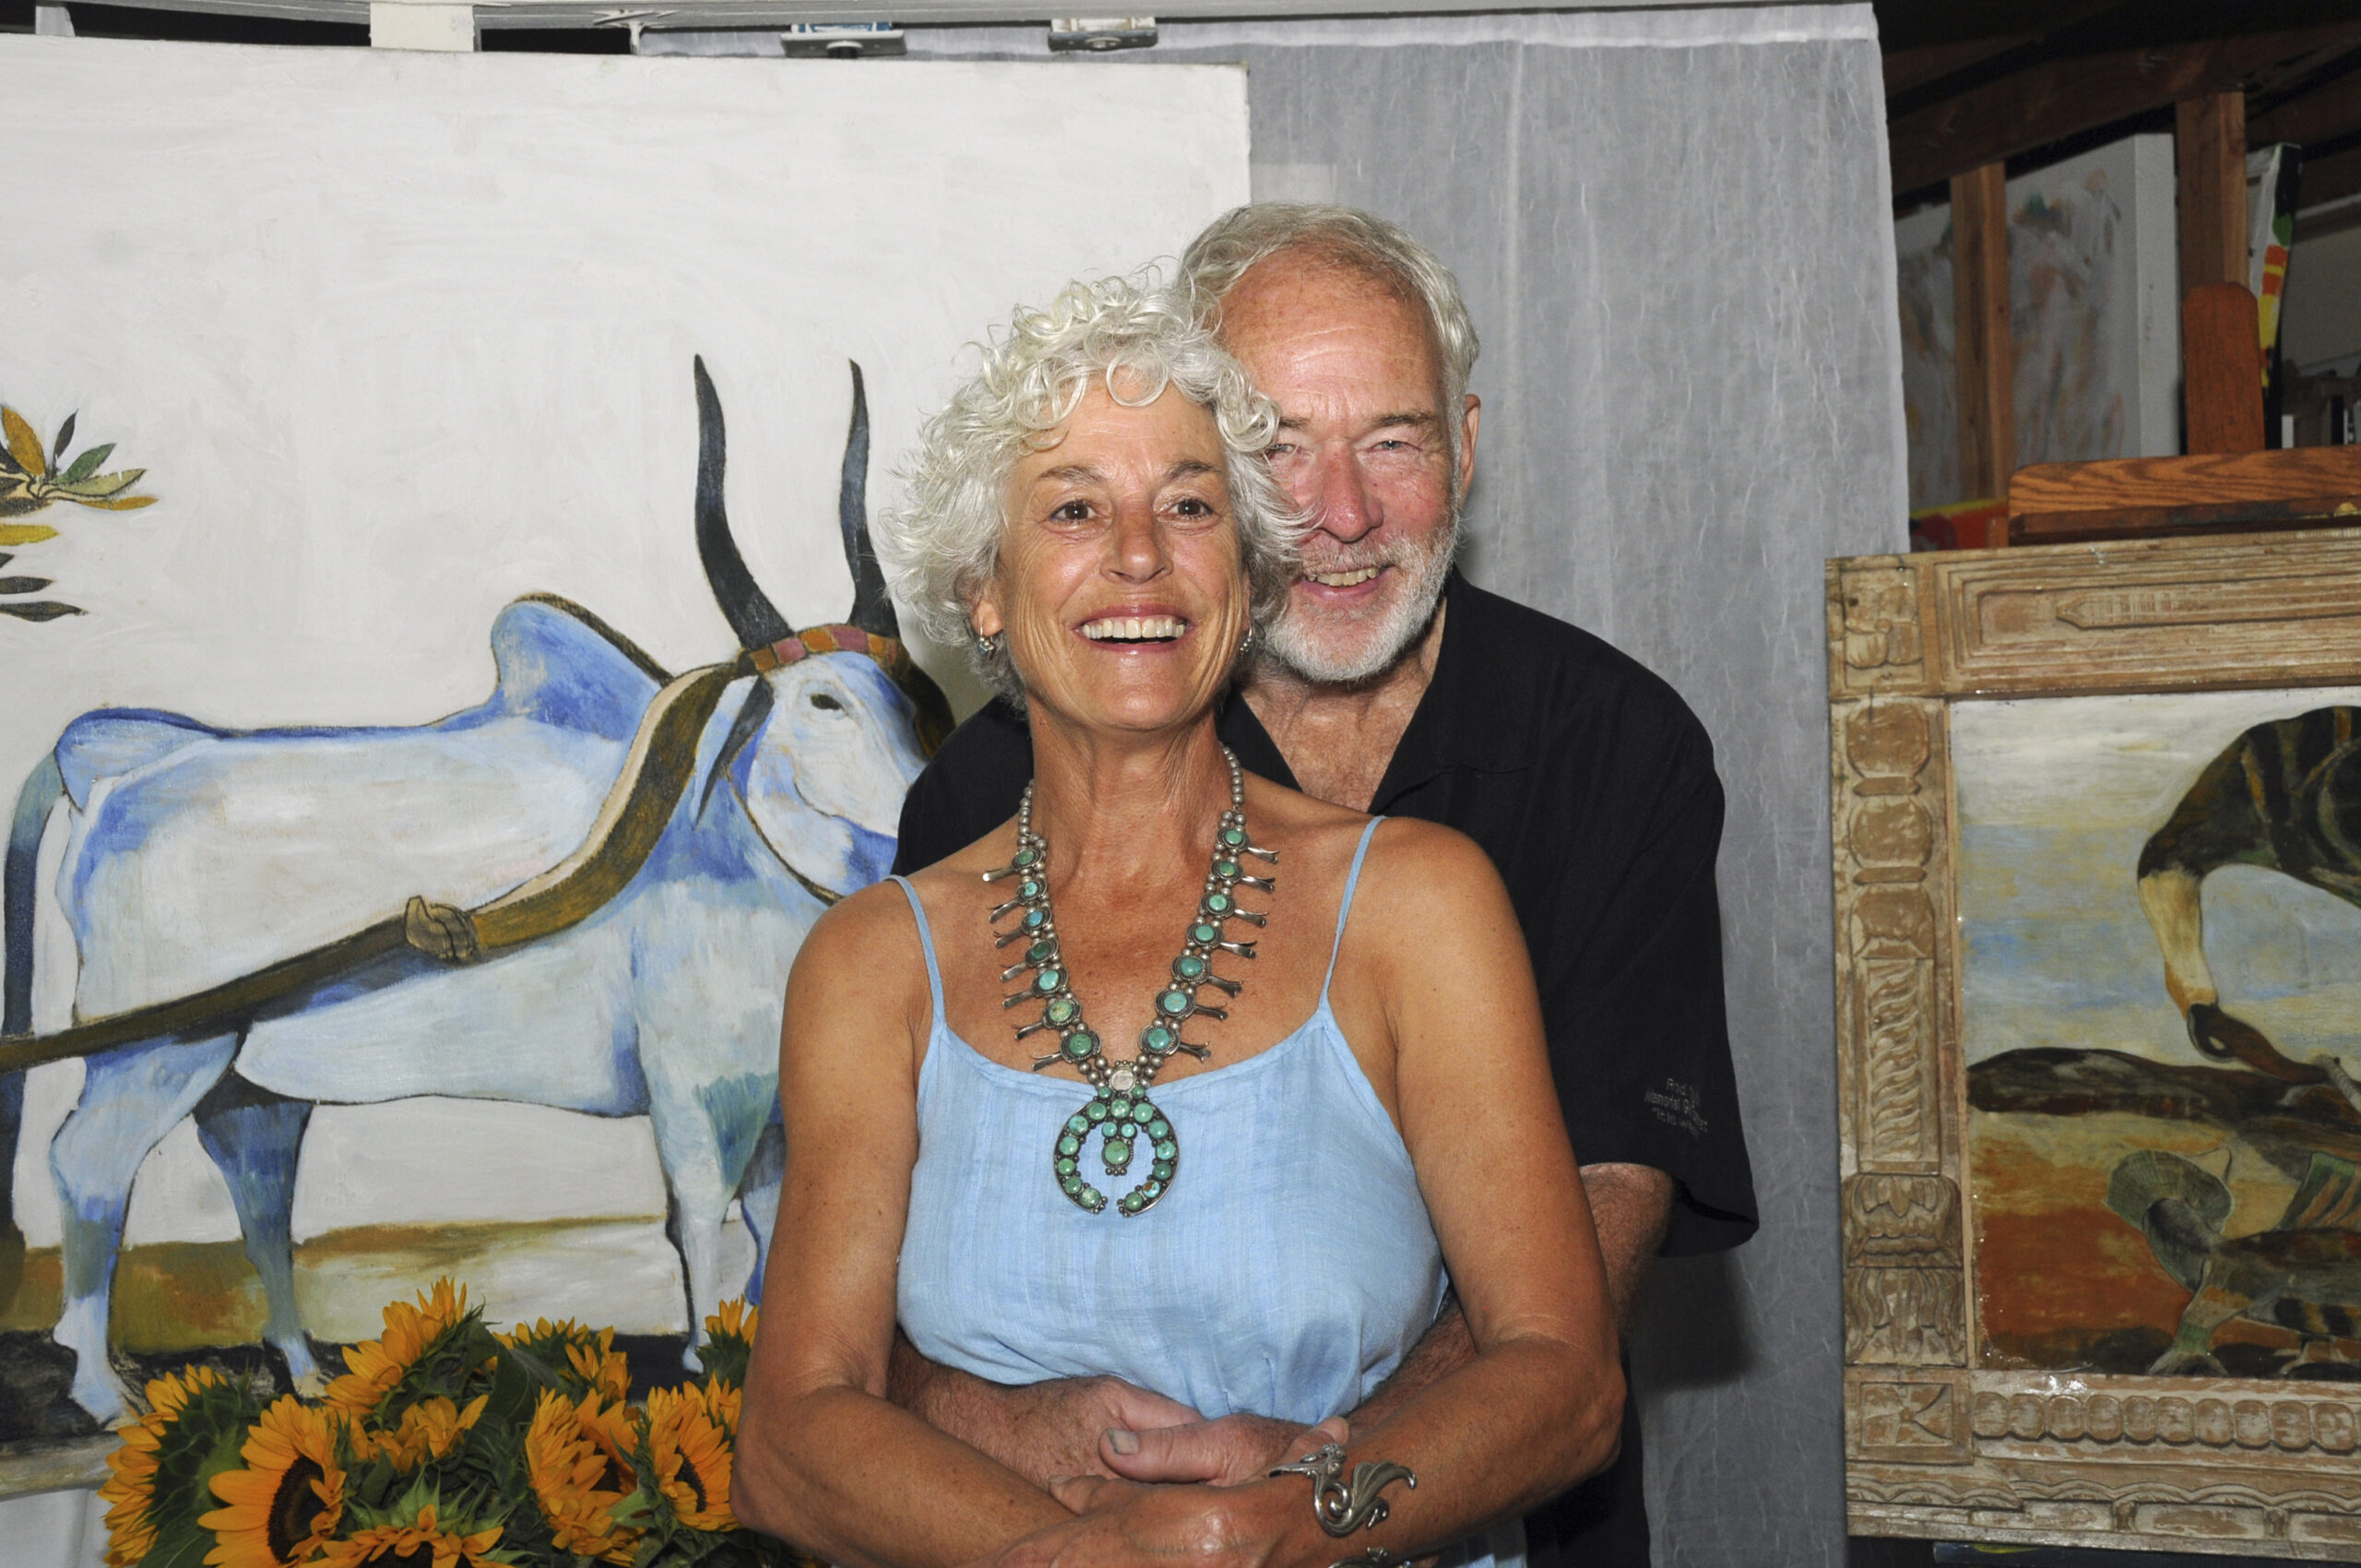 Nancy and Paton Miller on Friday evening at artist Hans Van de Bovenkamp's 7-acre, Sagaponack indoor/outdoor studio and sculpture gardens for the opening of an art exhibition and sale of works by  Van de Bovenkamp, Miller, Stephanie Brody-Lederman and the late Charles Waller. The Show is curated by Geralyne Lewandowski. A portion of the proceeds will benefit Maureen's Haven Homeless Outreach.   RICHARD LEWIN